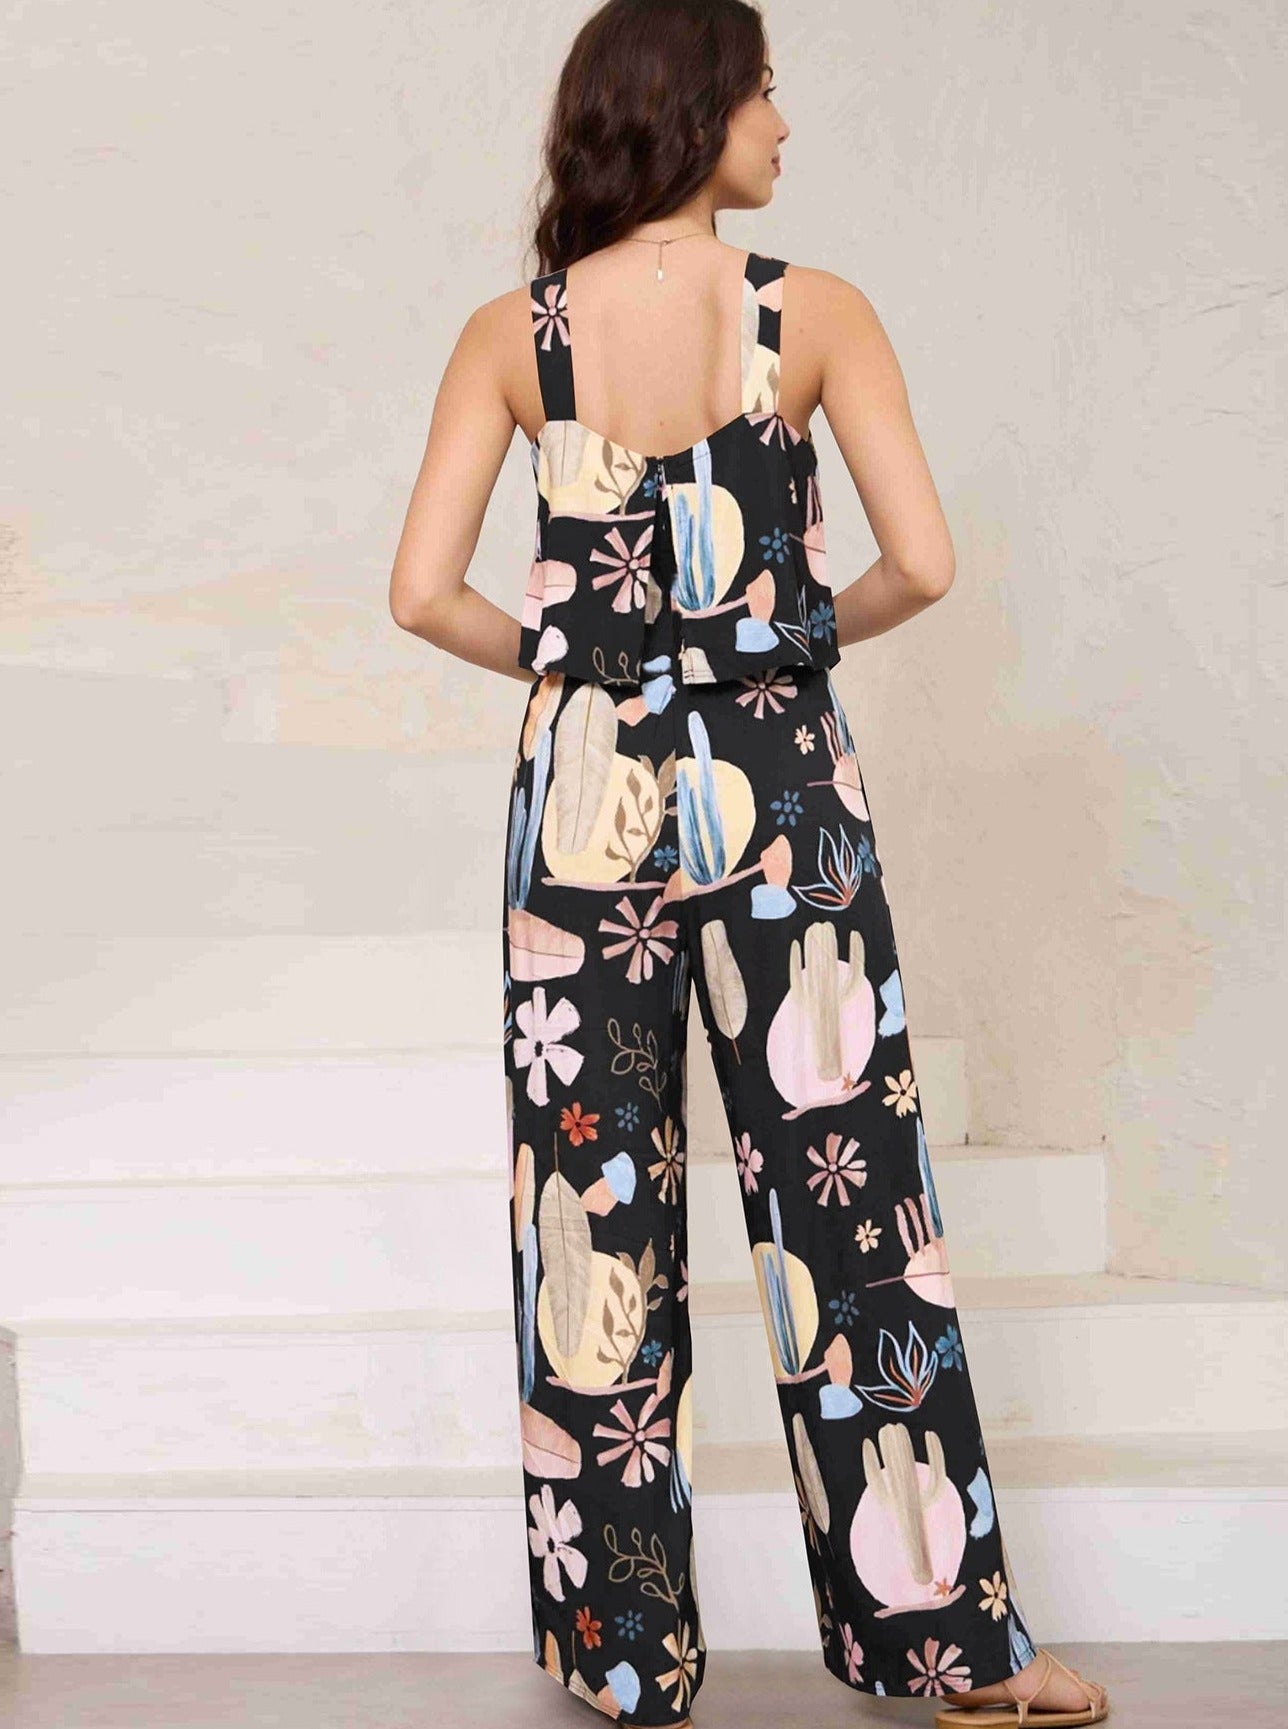 Two Piece Graphic Printed Sleeveless Shirt and Pants Set